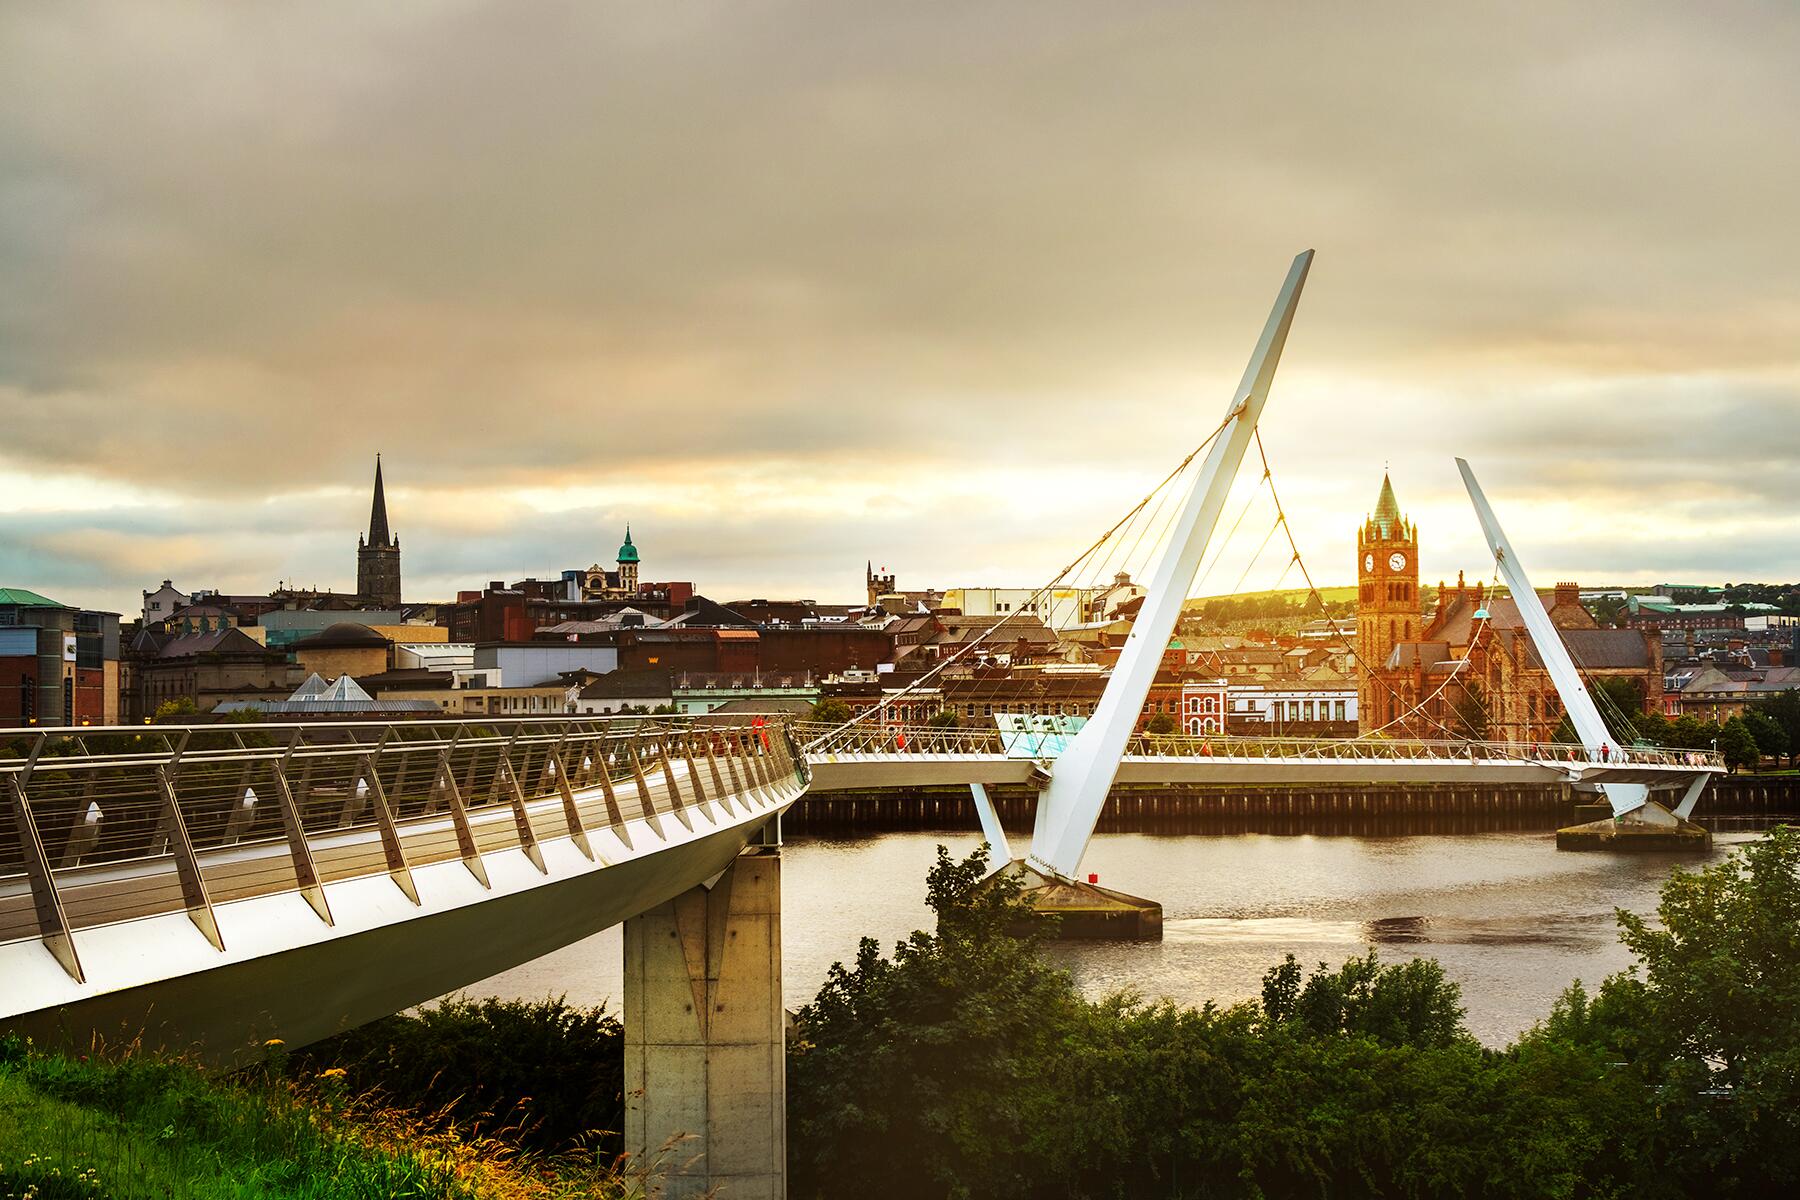 <a href='https://www.fodors.com/world/europe/ireland/experiences/news/photos/ultimate-things-to-do-in-ireland#'>From &quot;25 Ultimate Things to Do In Ireland: Walk the Mighty Walls of Derry&quot;</a>